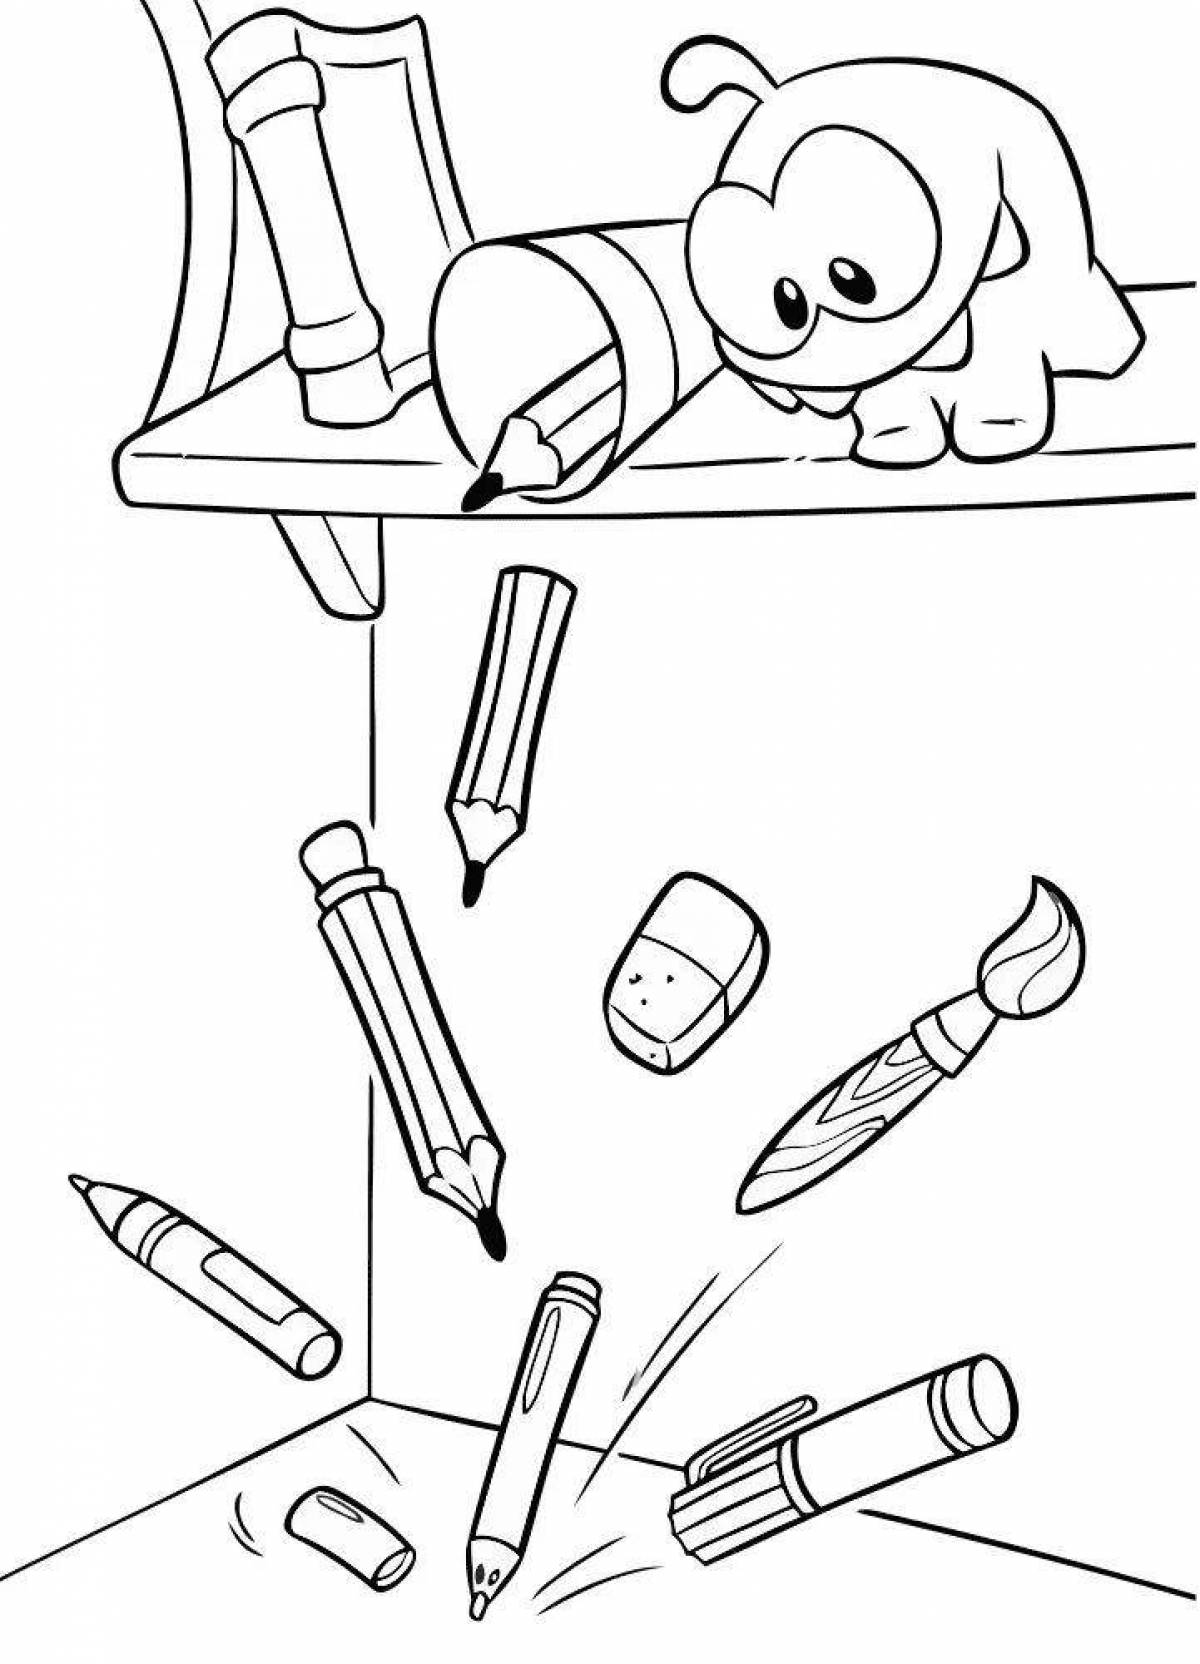 Playful roux coloring page